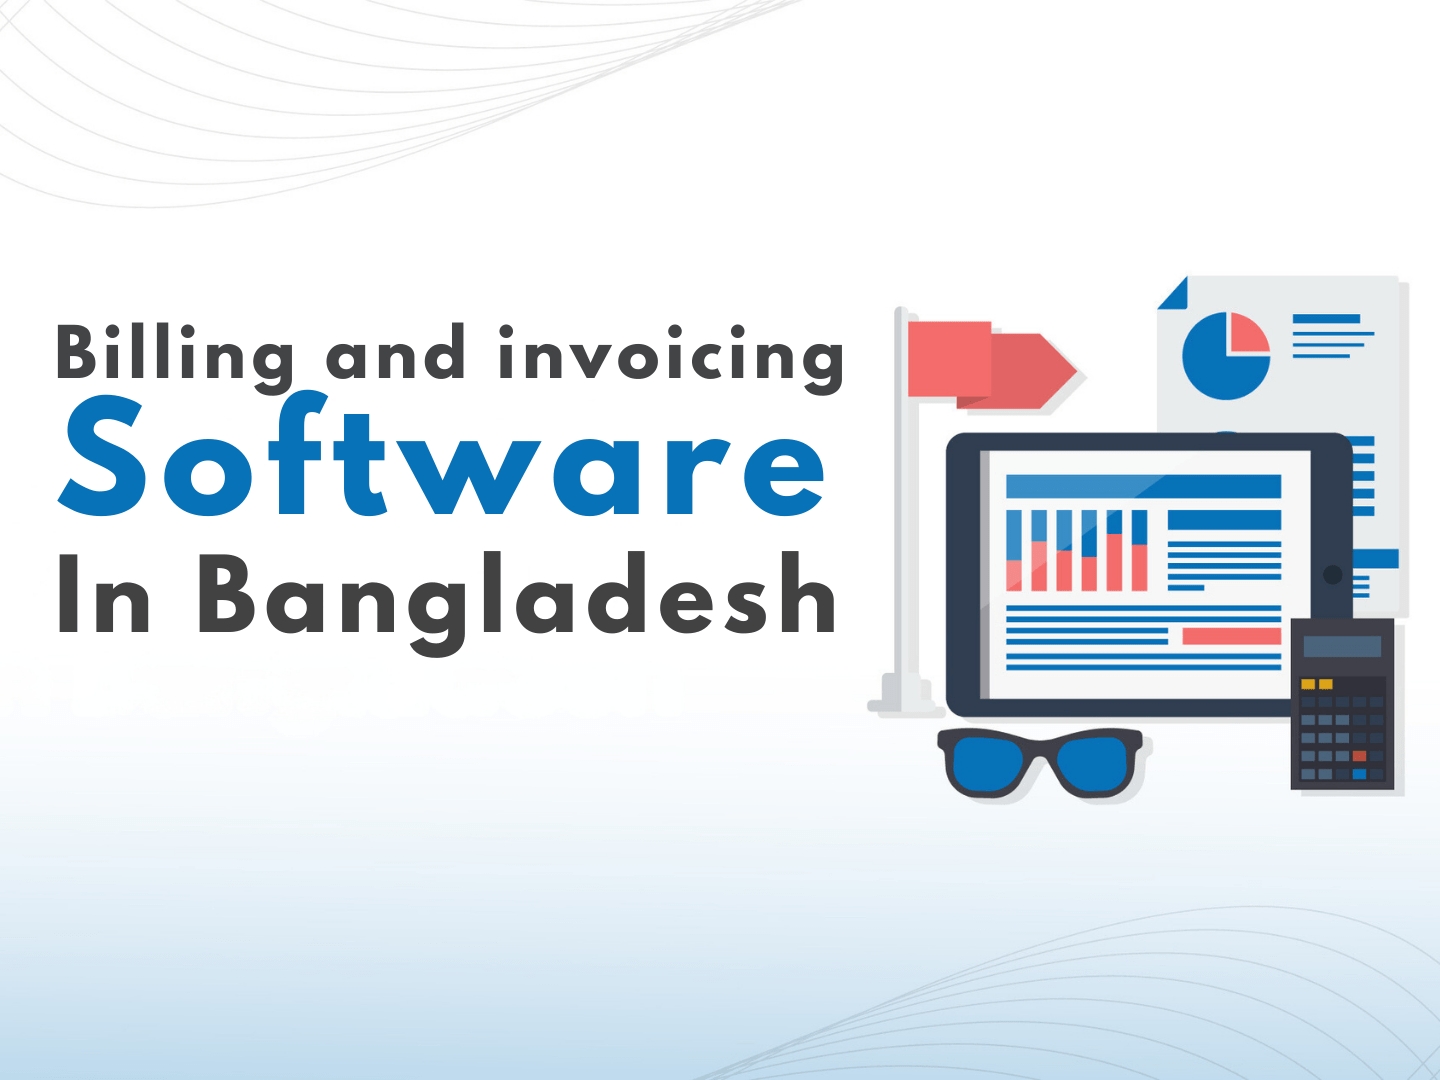 Importance of Billing and Invoicing software in Bangladesh